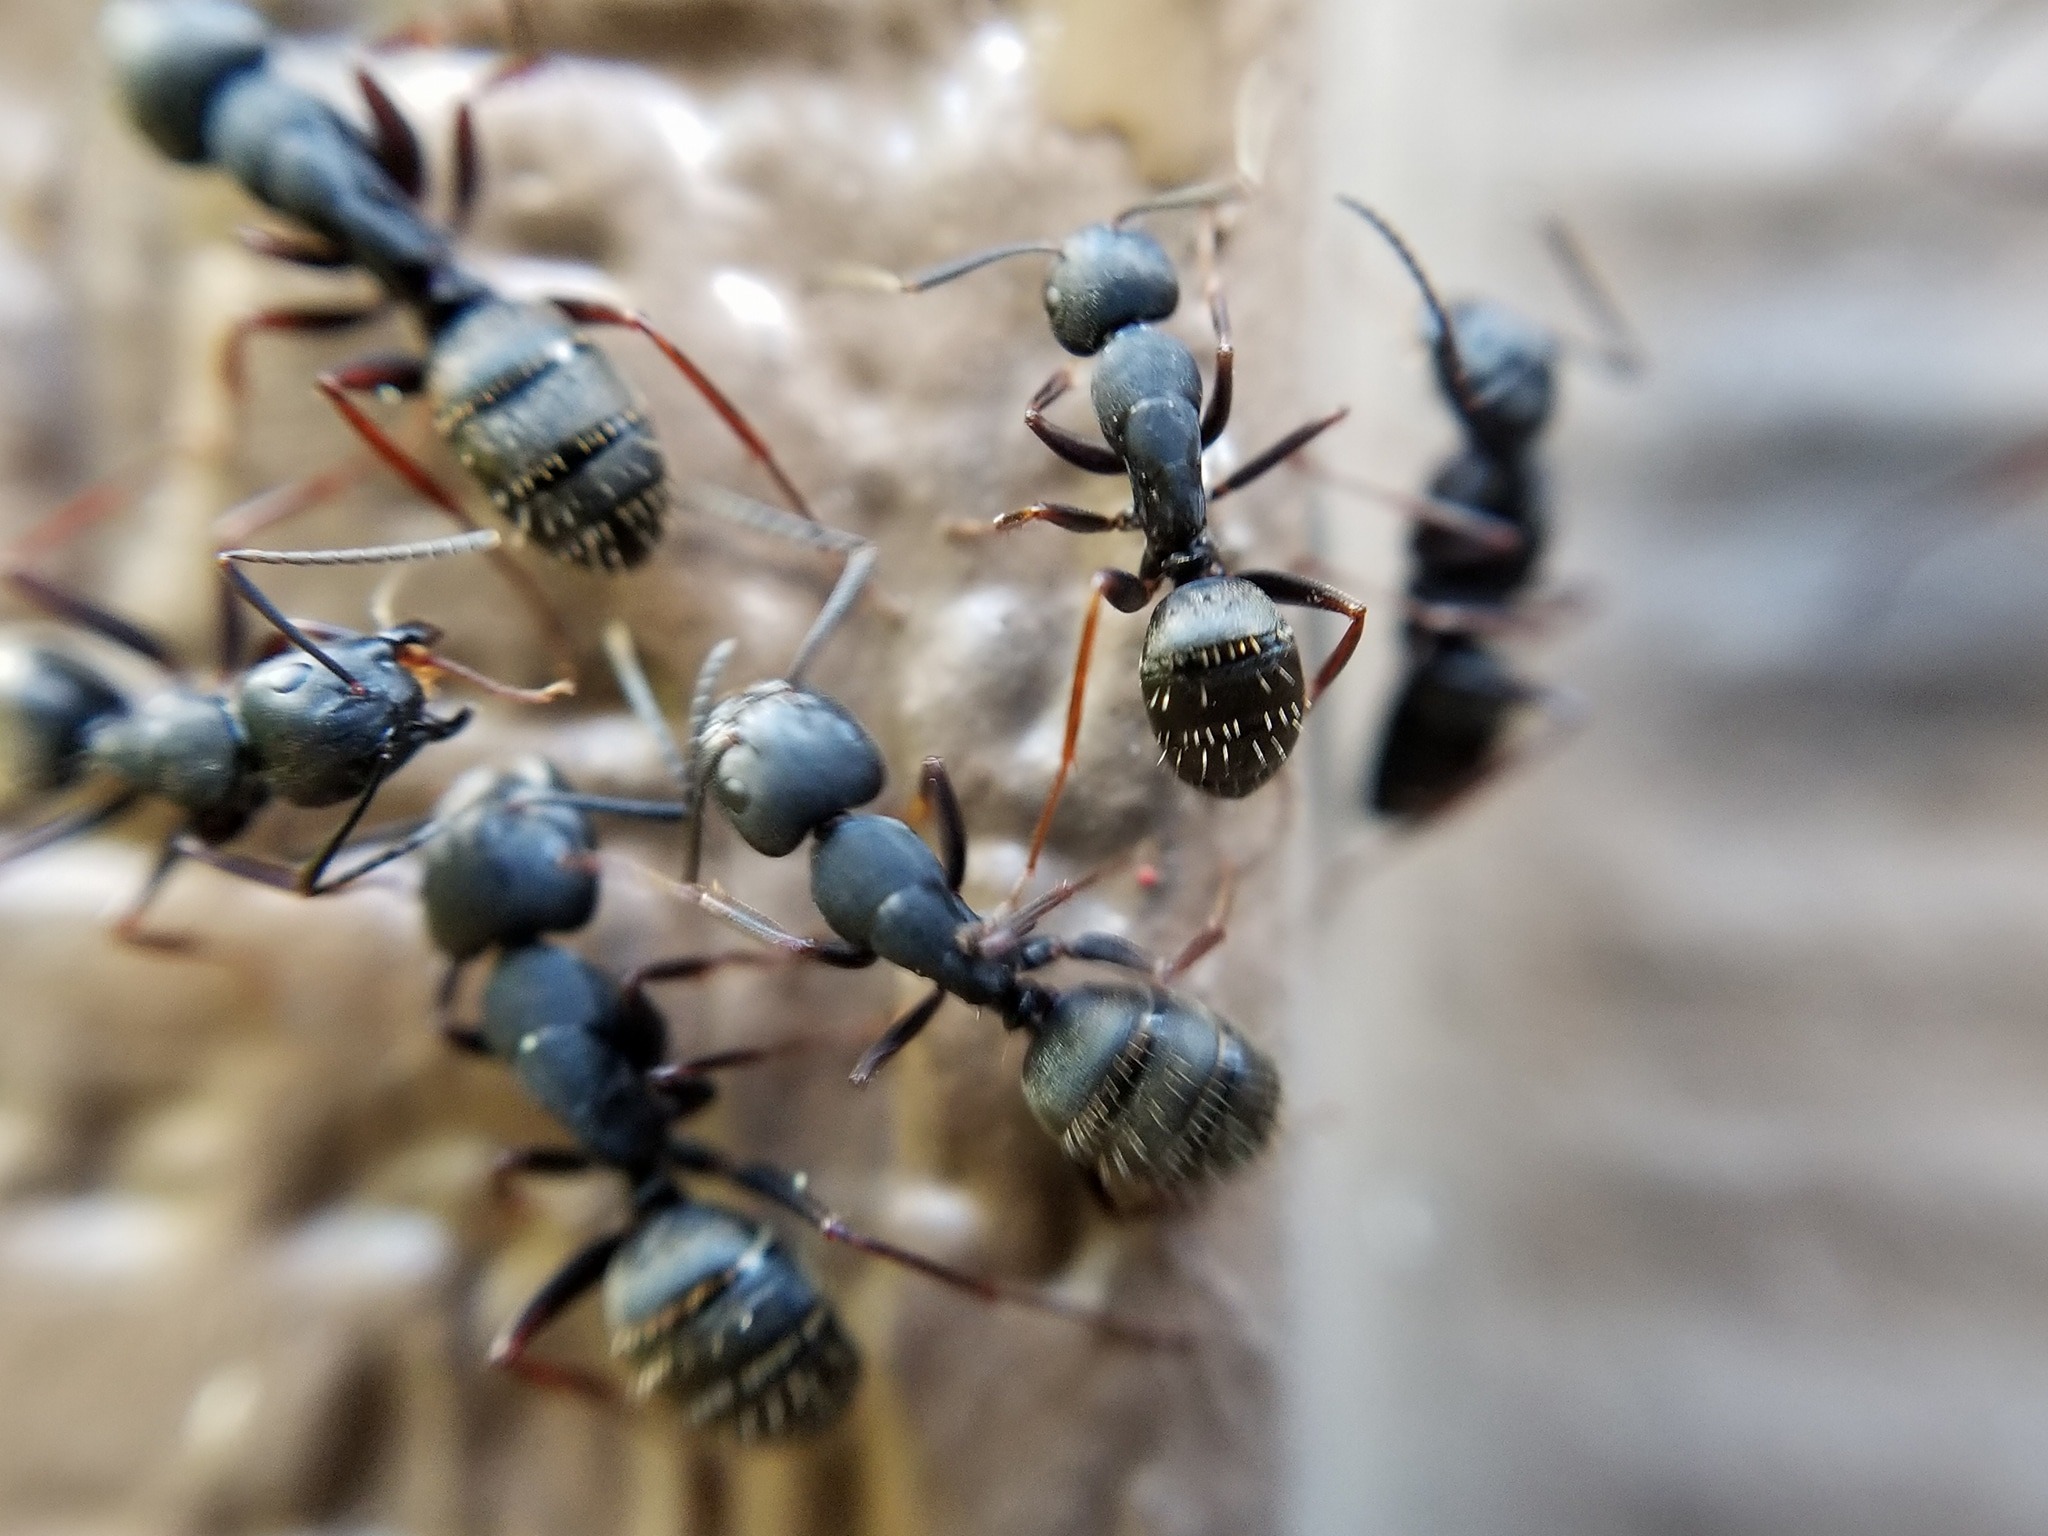 this image shows ants